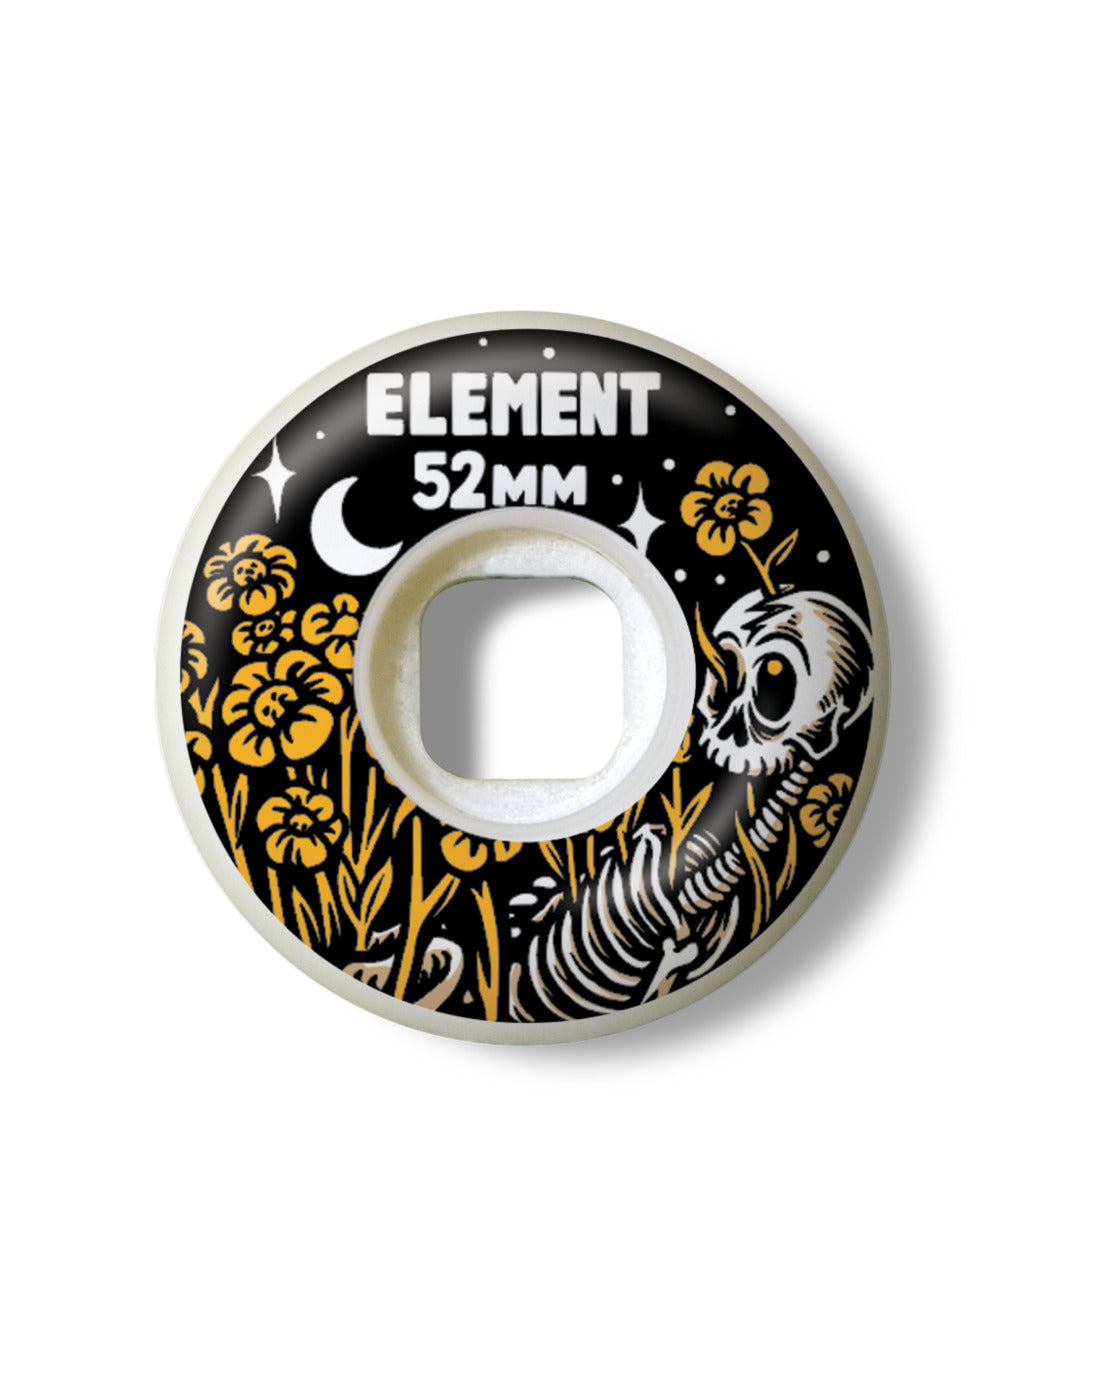 Element x Timber Bygone 52mm Wheels 4-Pack - White